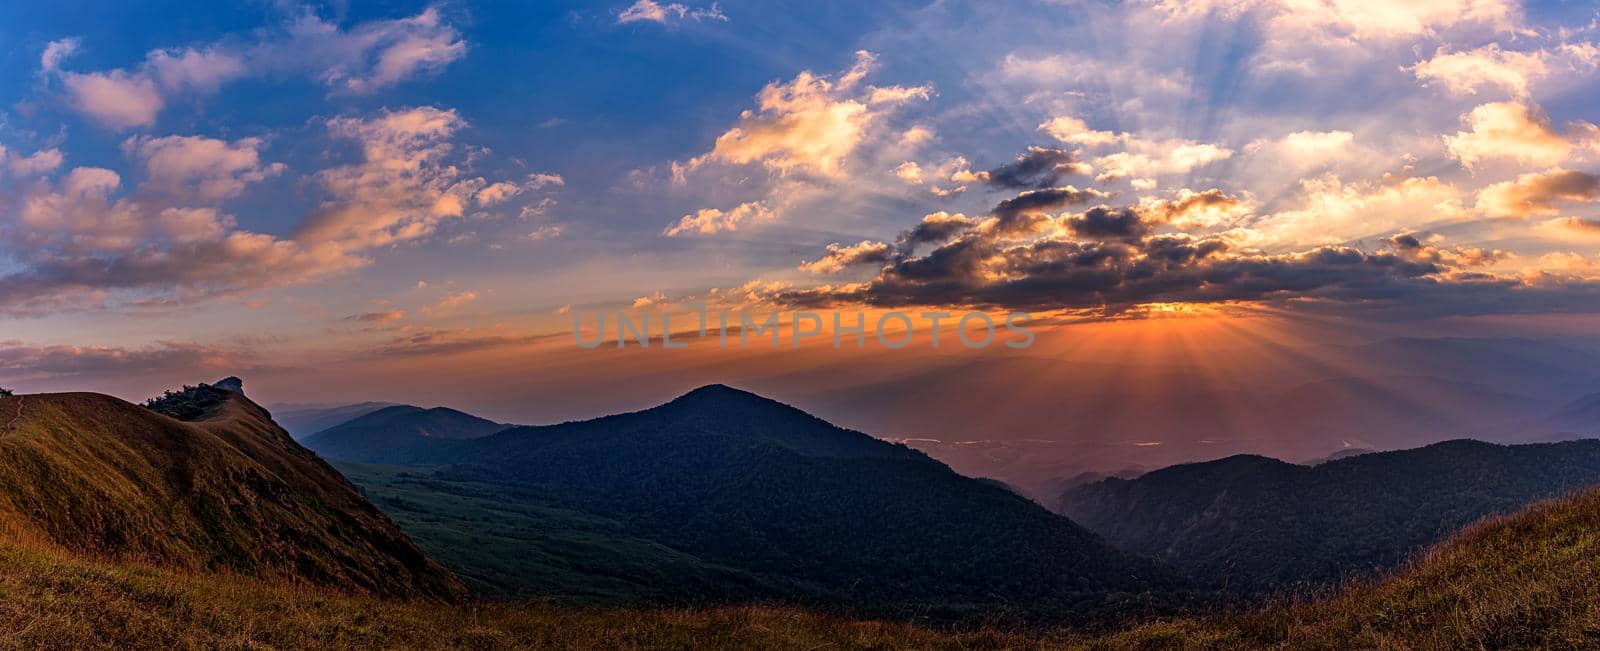 Beautiful sunset in the evening on Mon Chong mount, Chiang Mai, Thailand. by NuwatPhoto